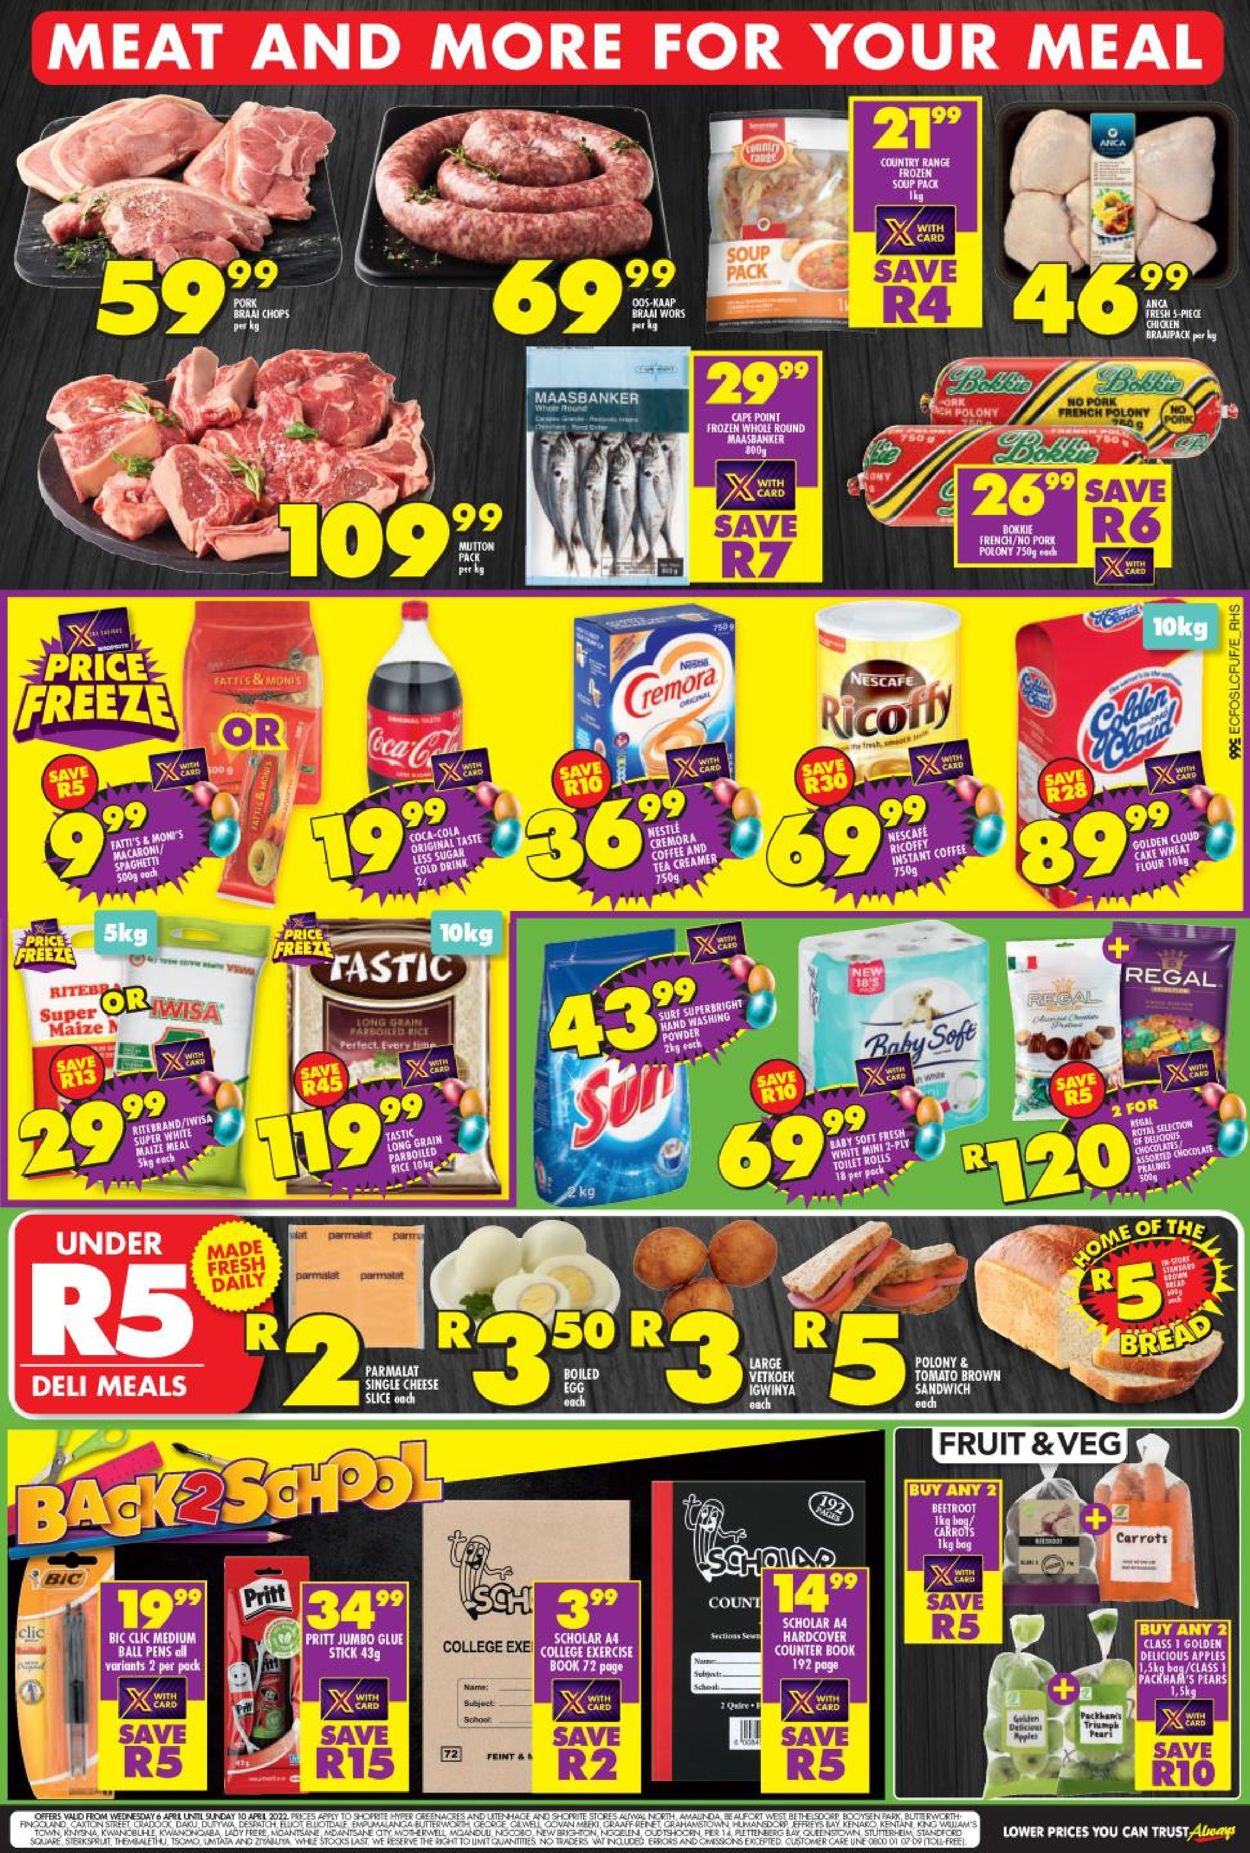 Shoprite EASTER 2022 Current catalogue 2022/04/06 2022/04/10 [2]